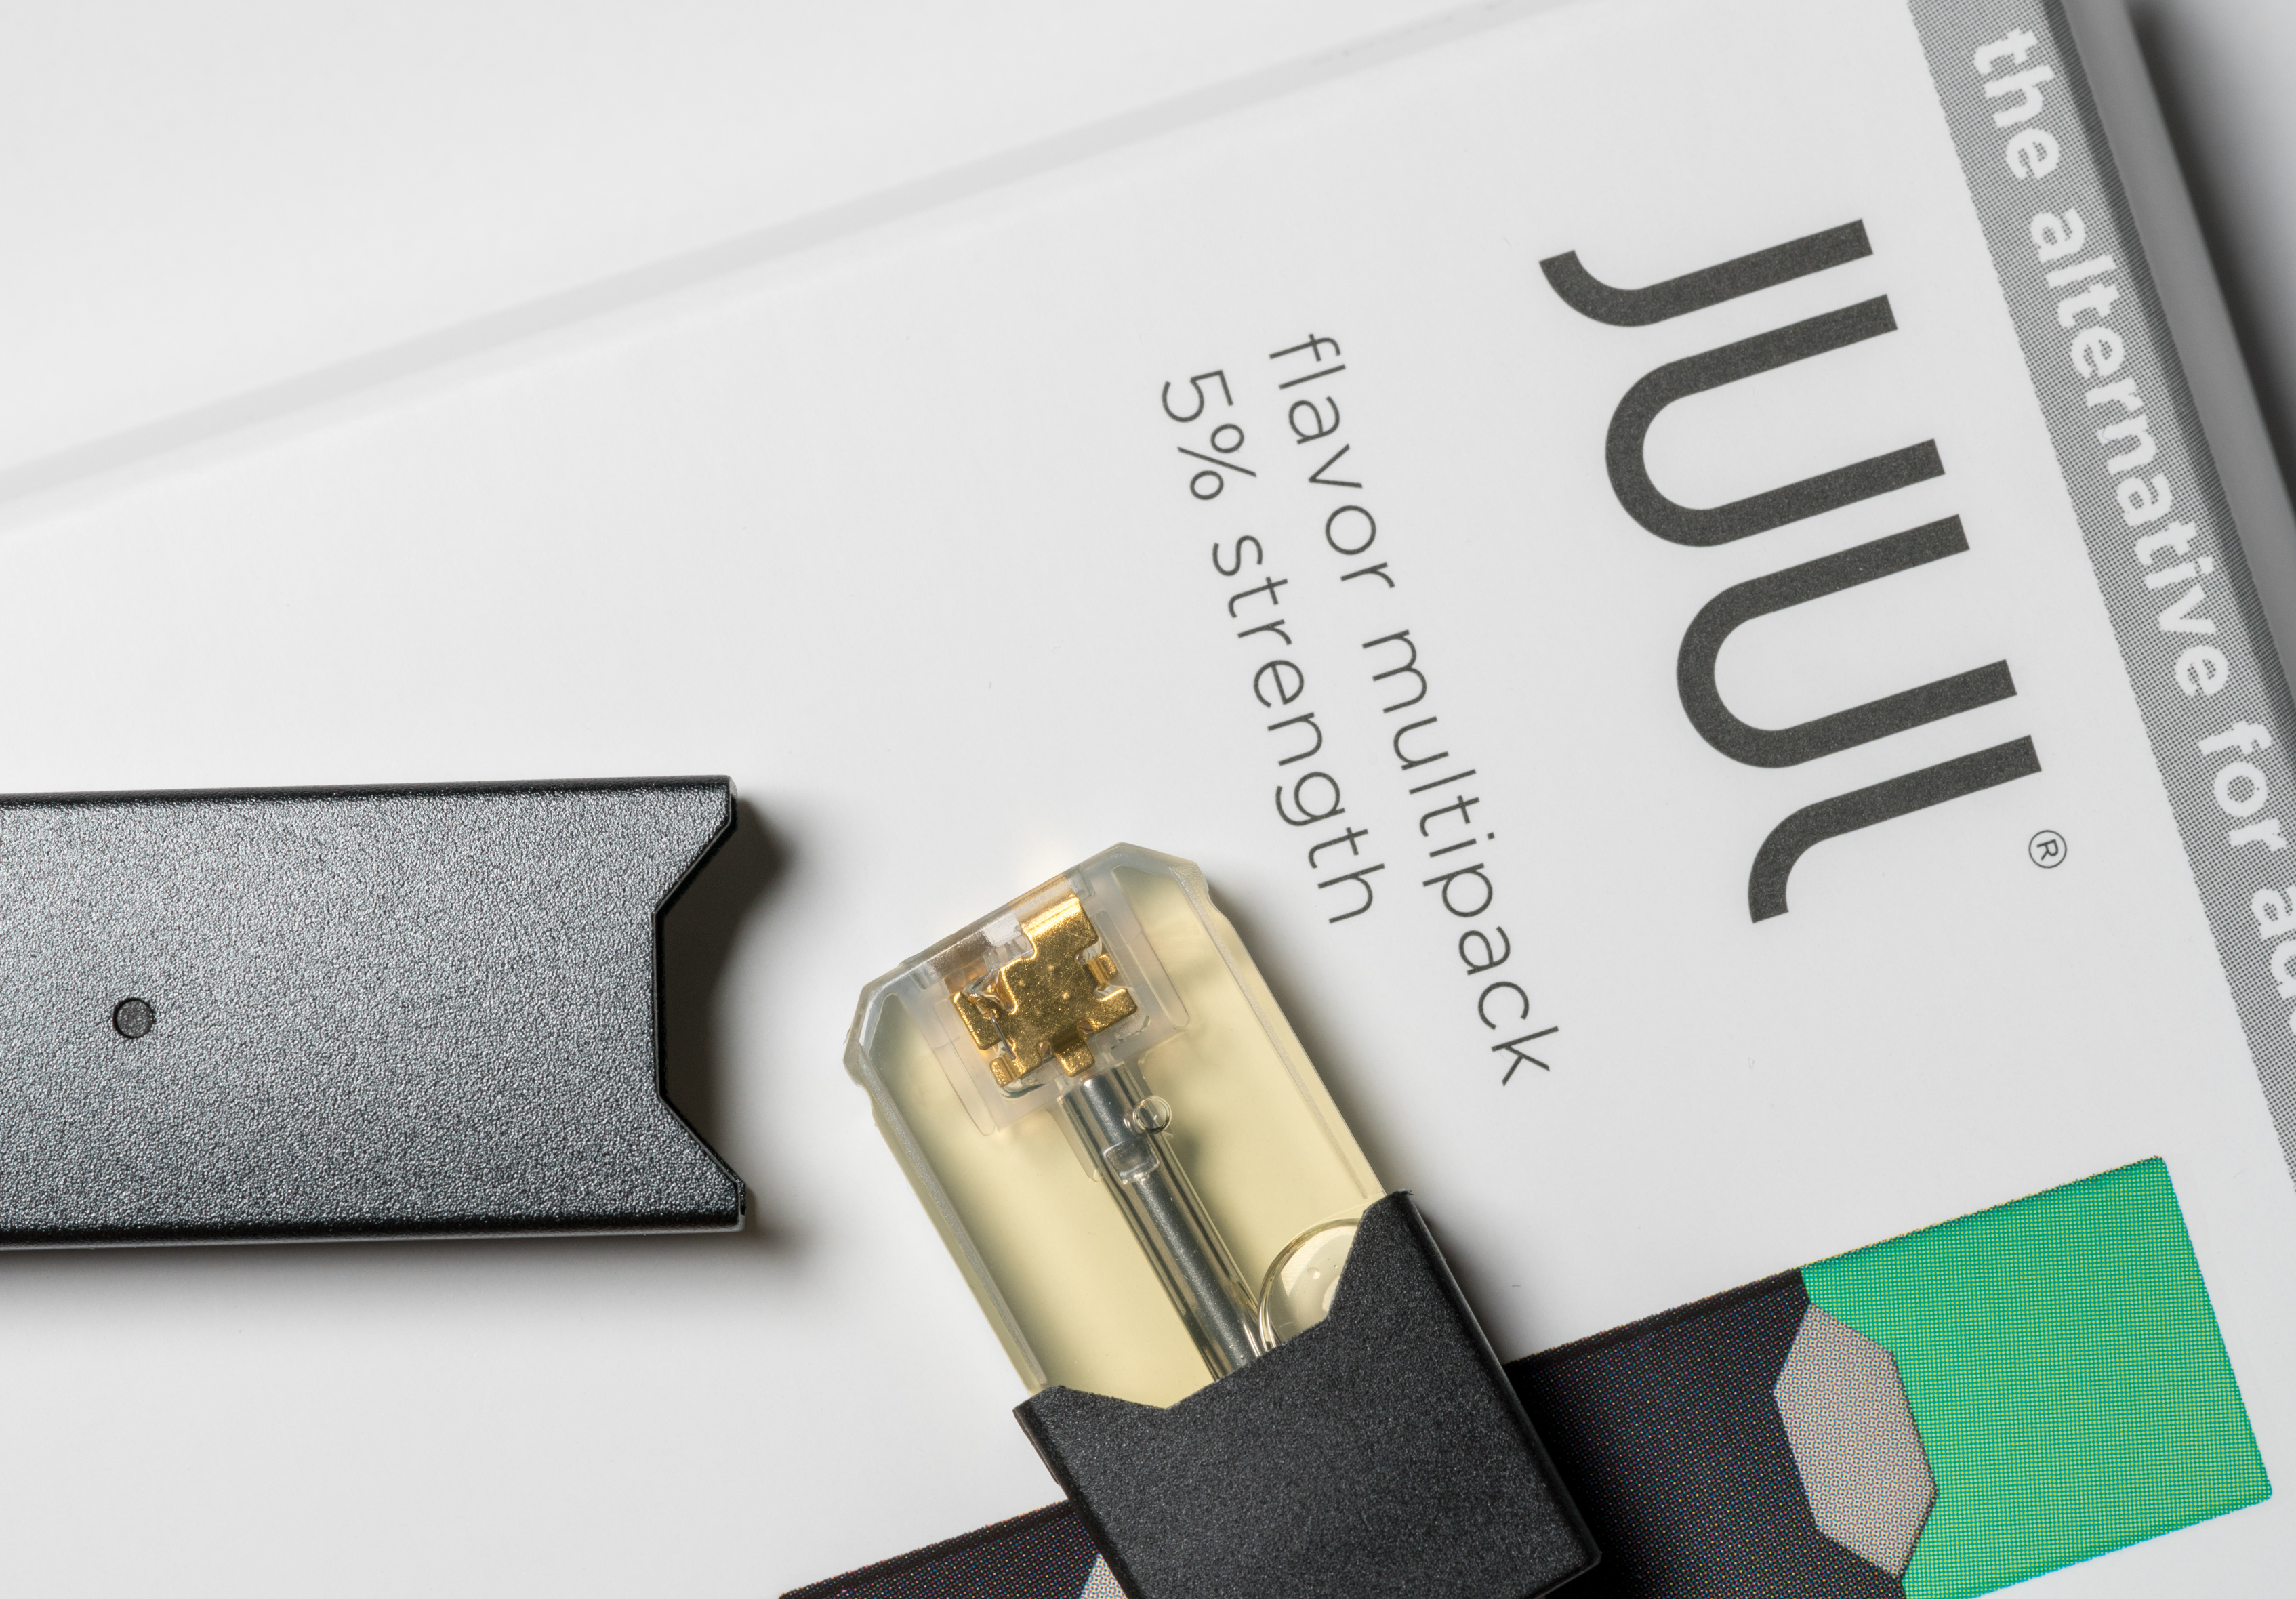  Juul Labs to expand into South Carolina